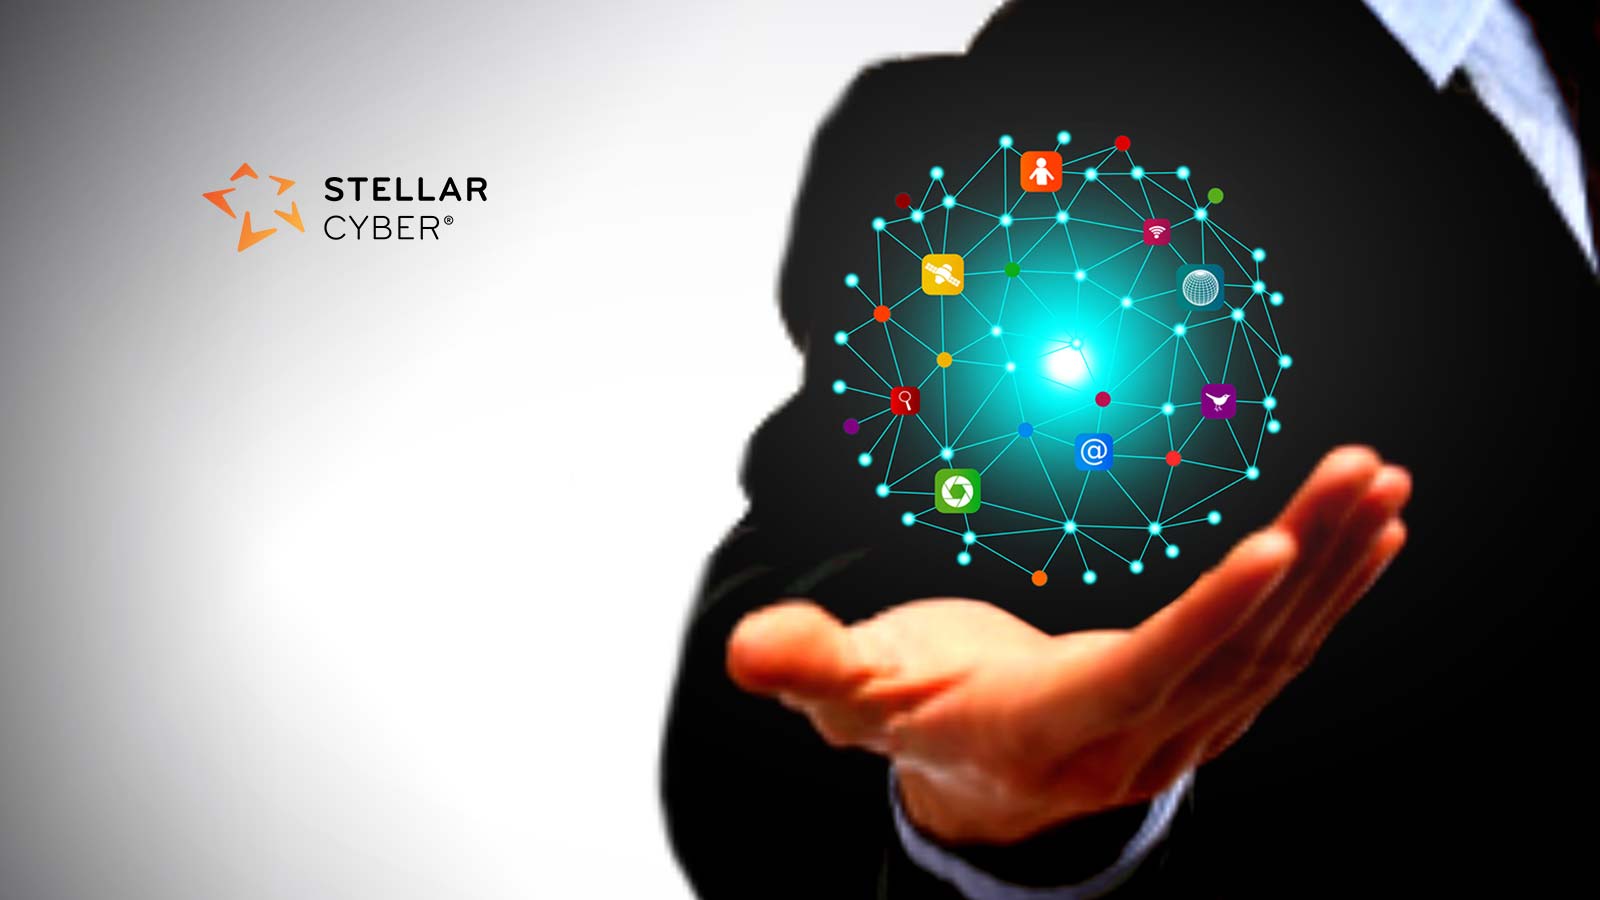 Stellar Cyber and BlackBerry Team Up to Deliver Open XDR for Threat Detection and Response